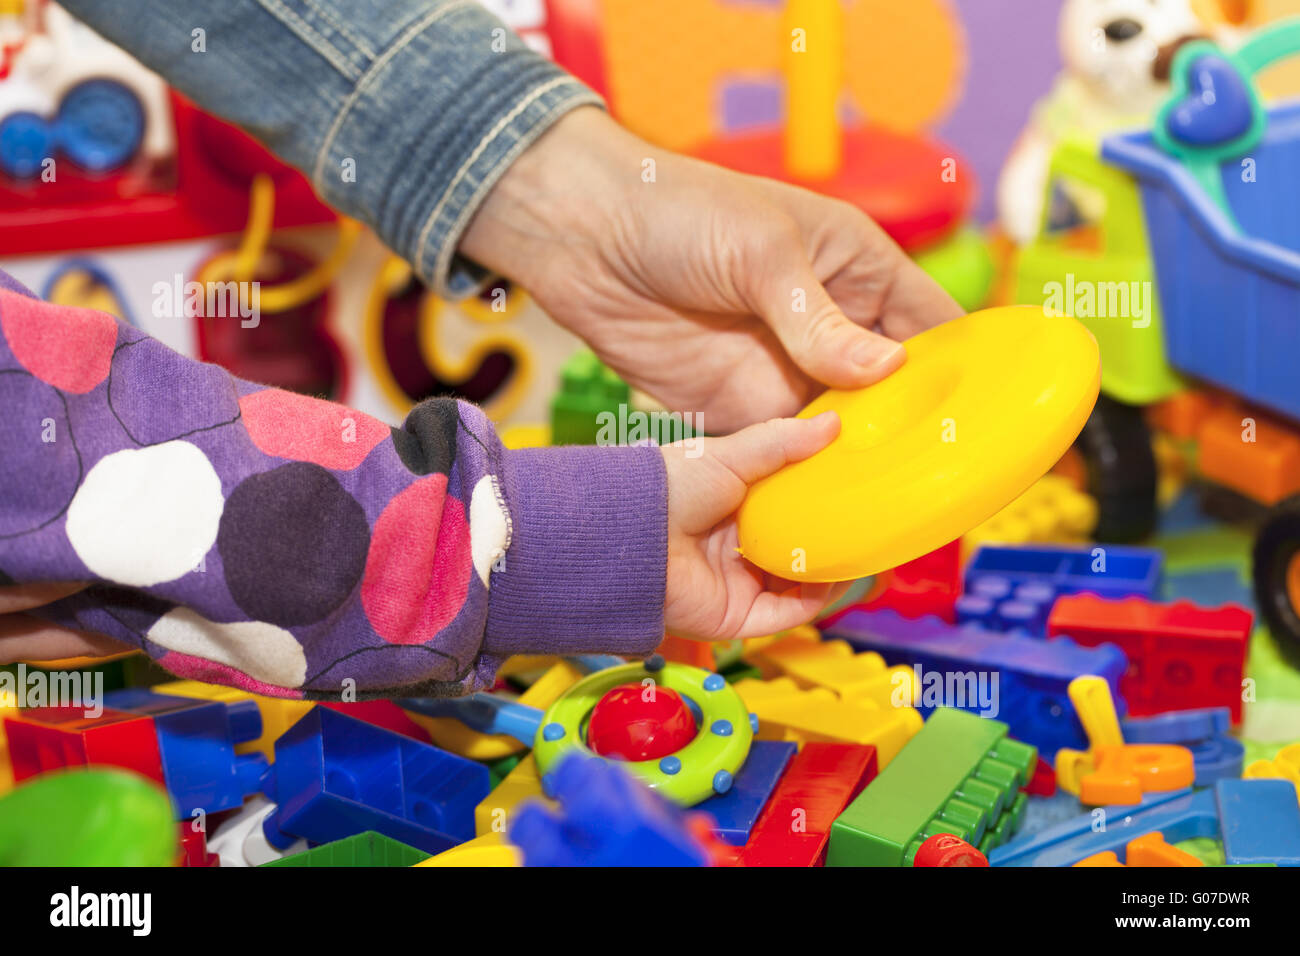 The mother and the child's arms at the toy pile Stock Photo